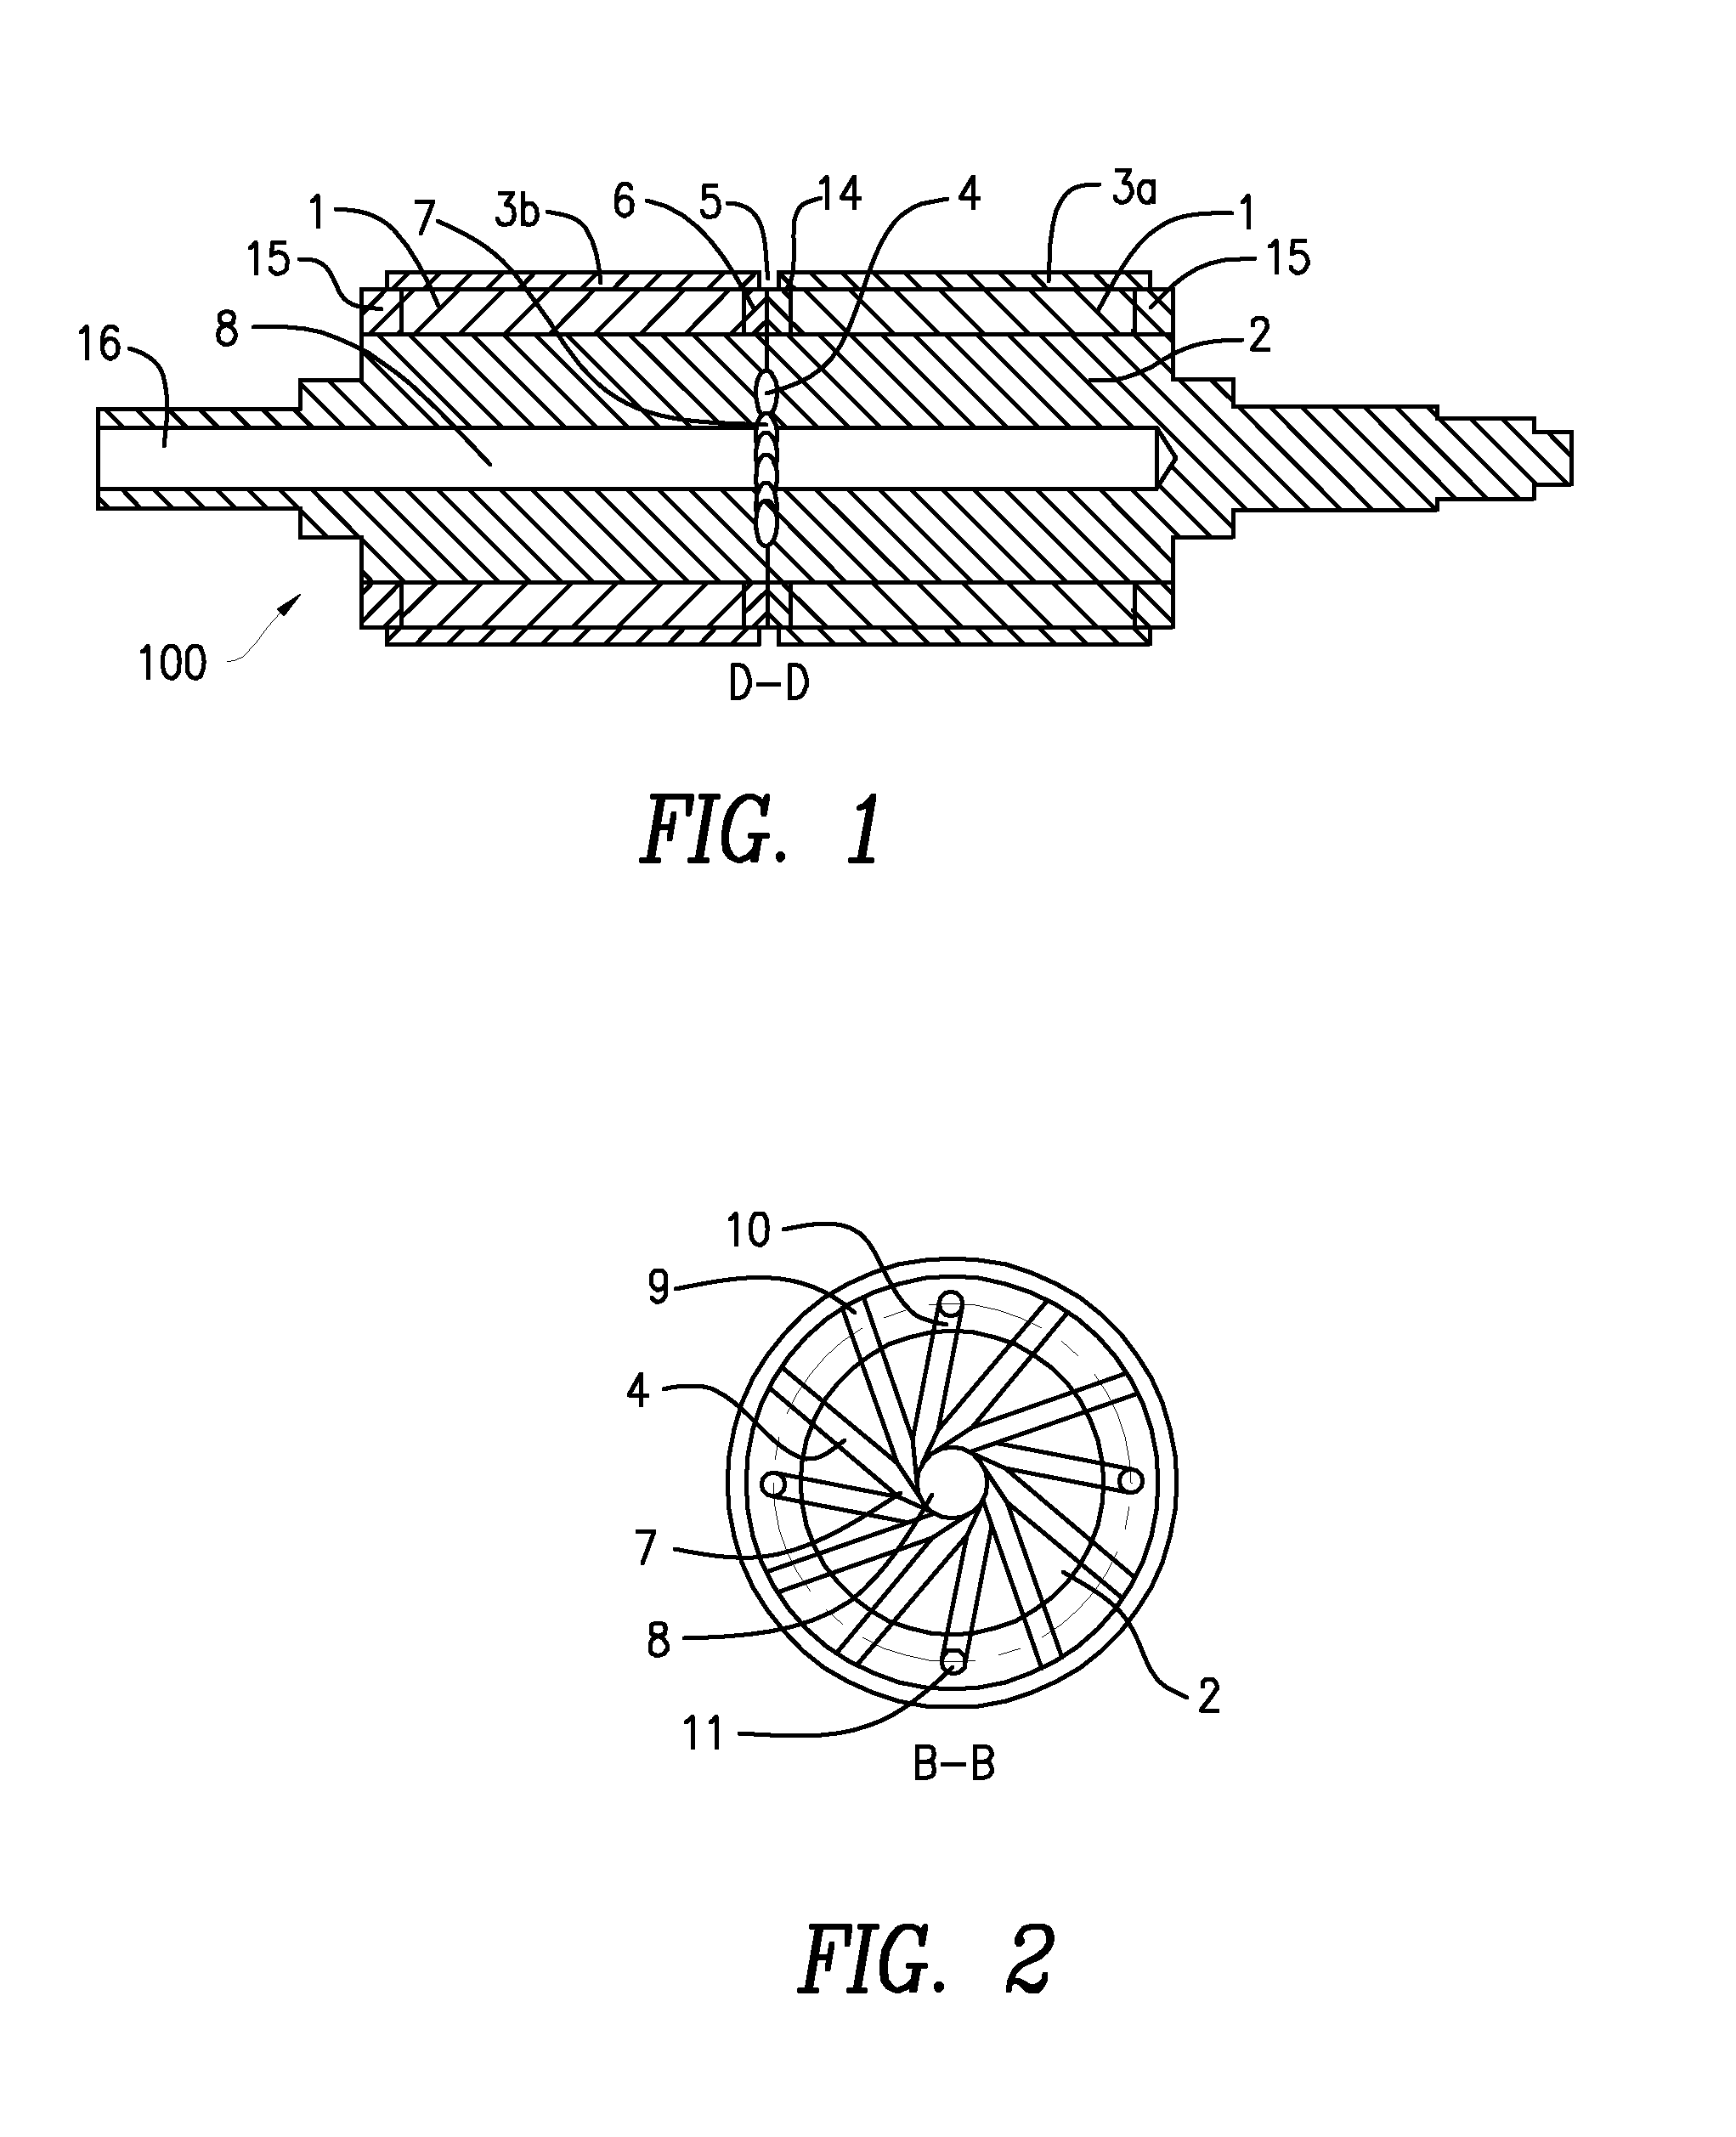 Self-cooled rotor for an electrical machine